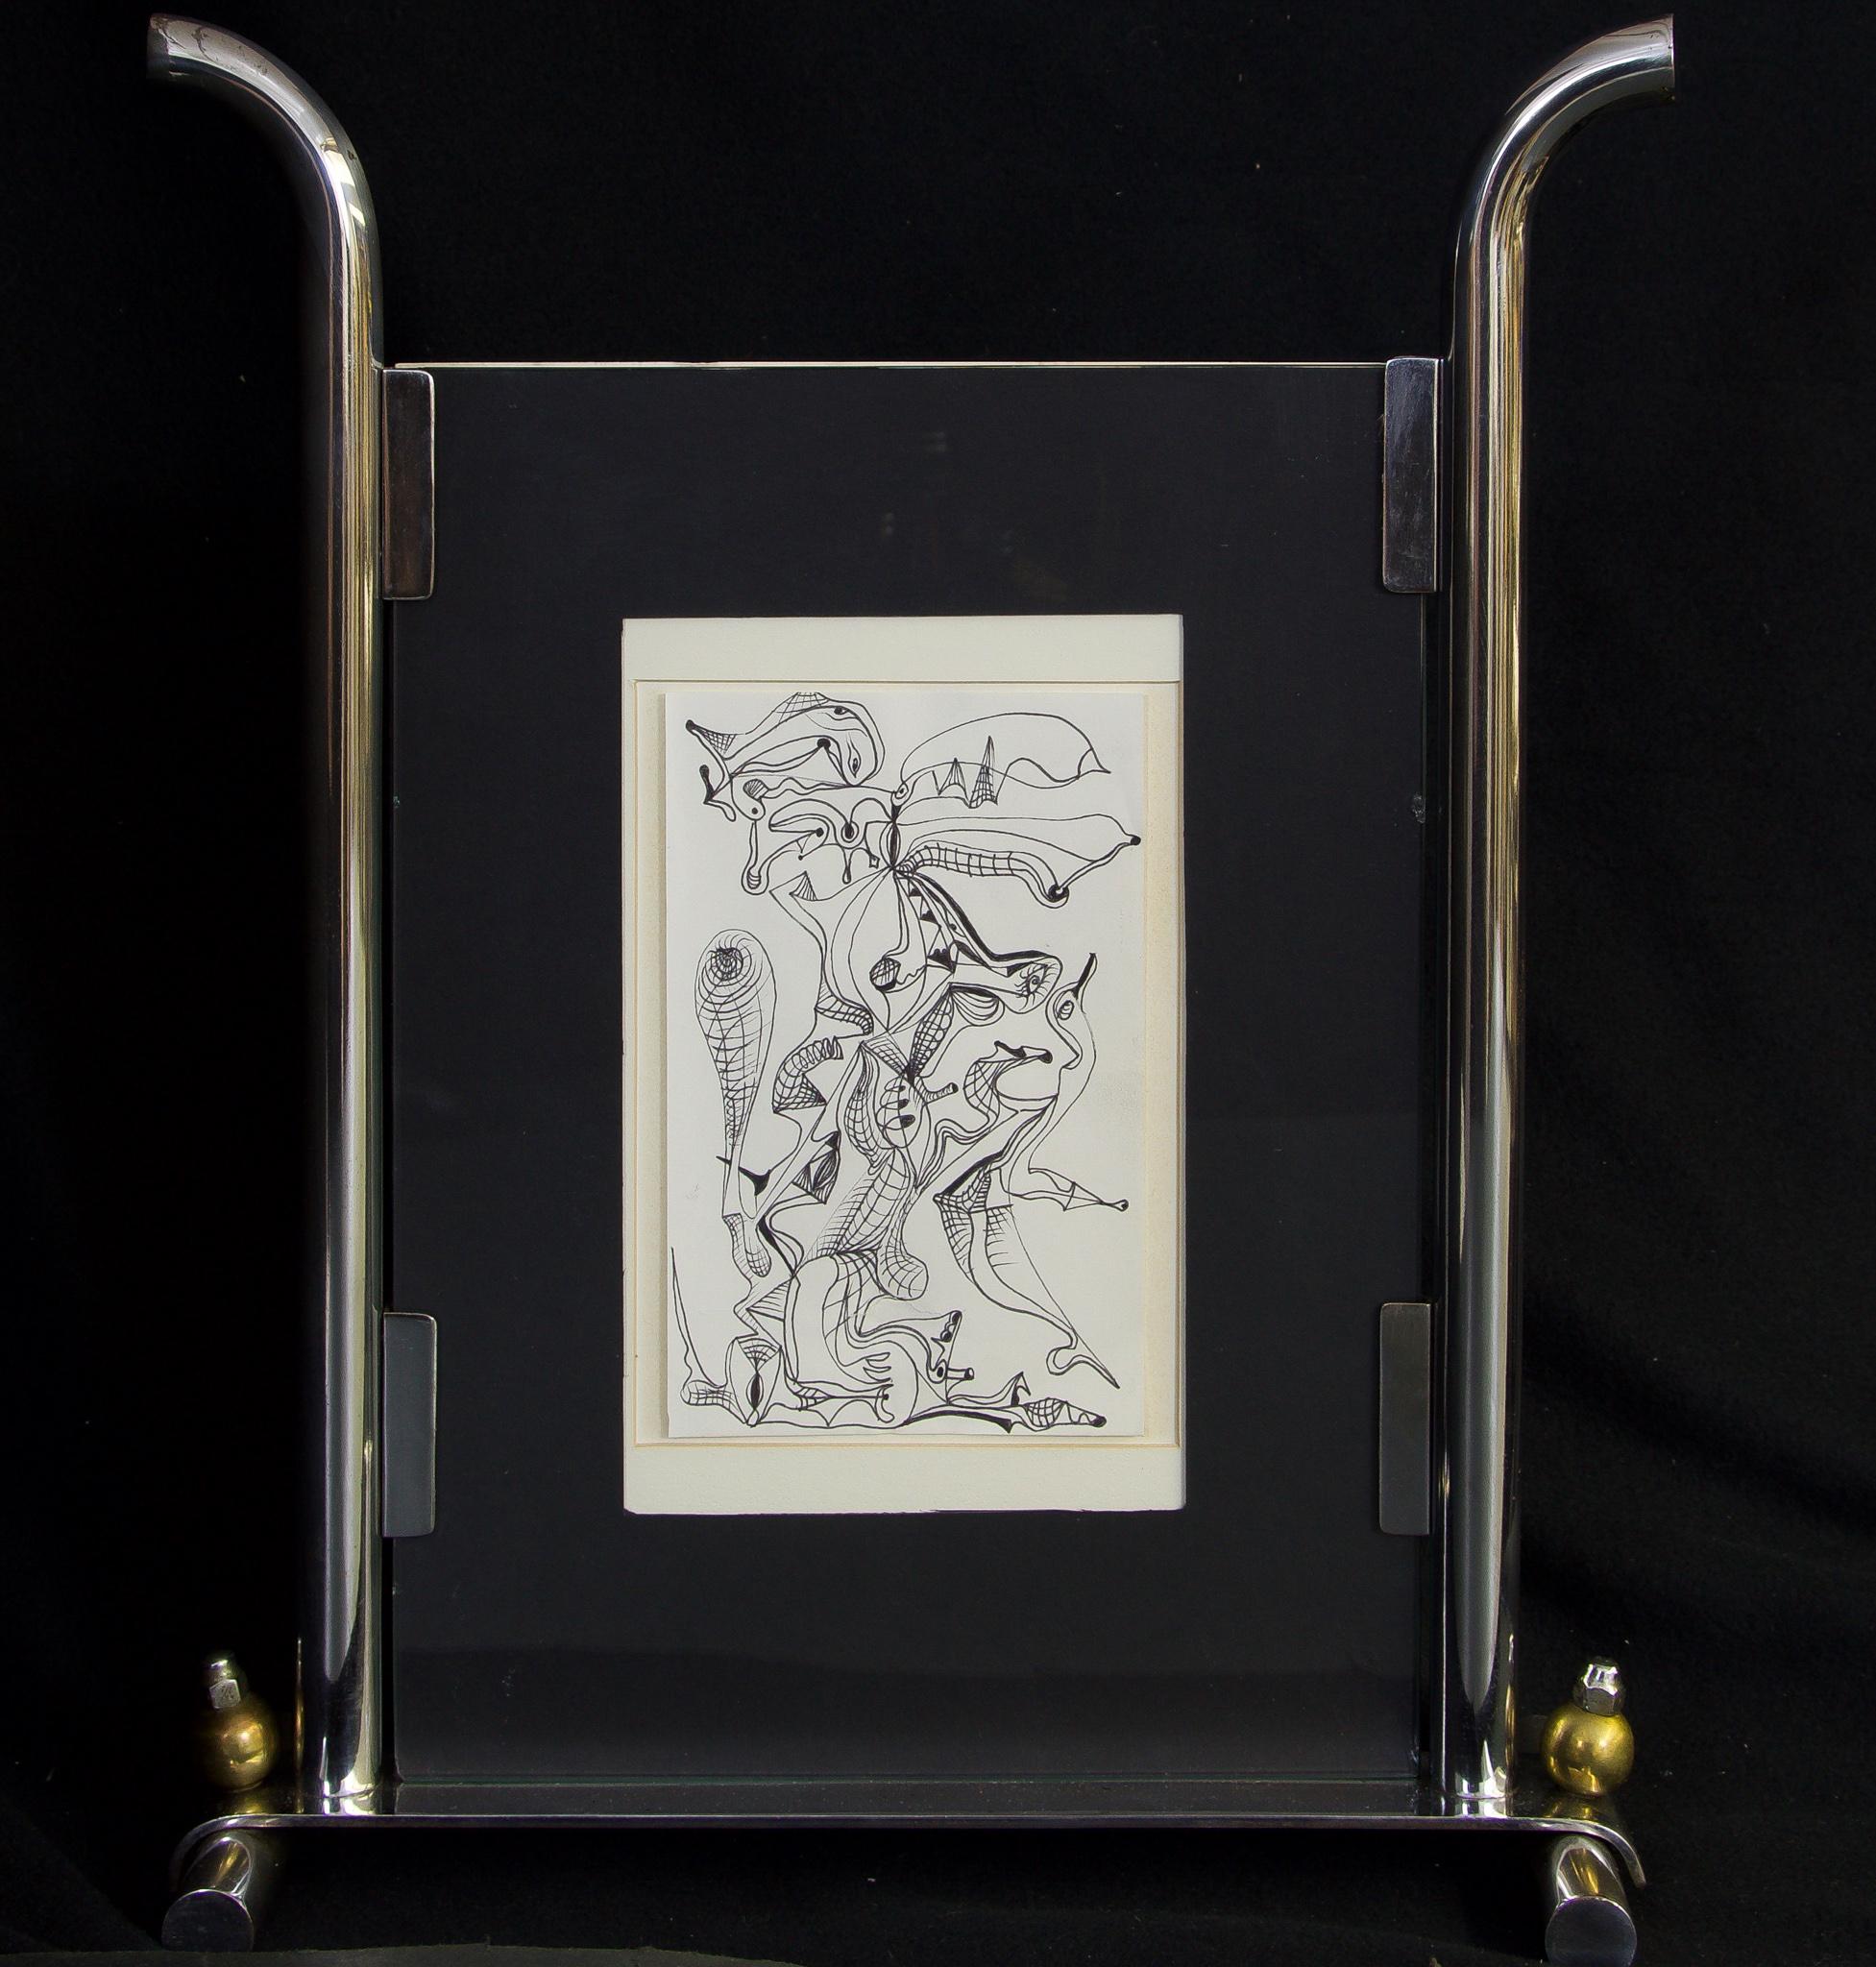 Karl Schneider Abstract Drawing - Tow the Line-India Ink Drawing on Paper in Standing Silver and Glass Case